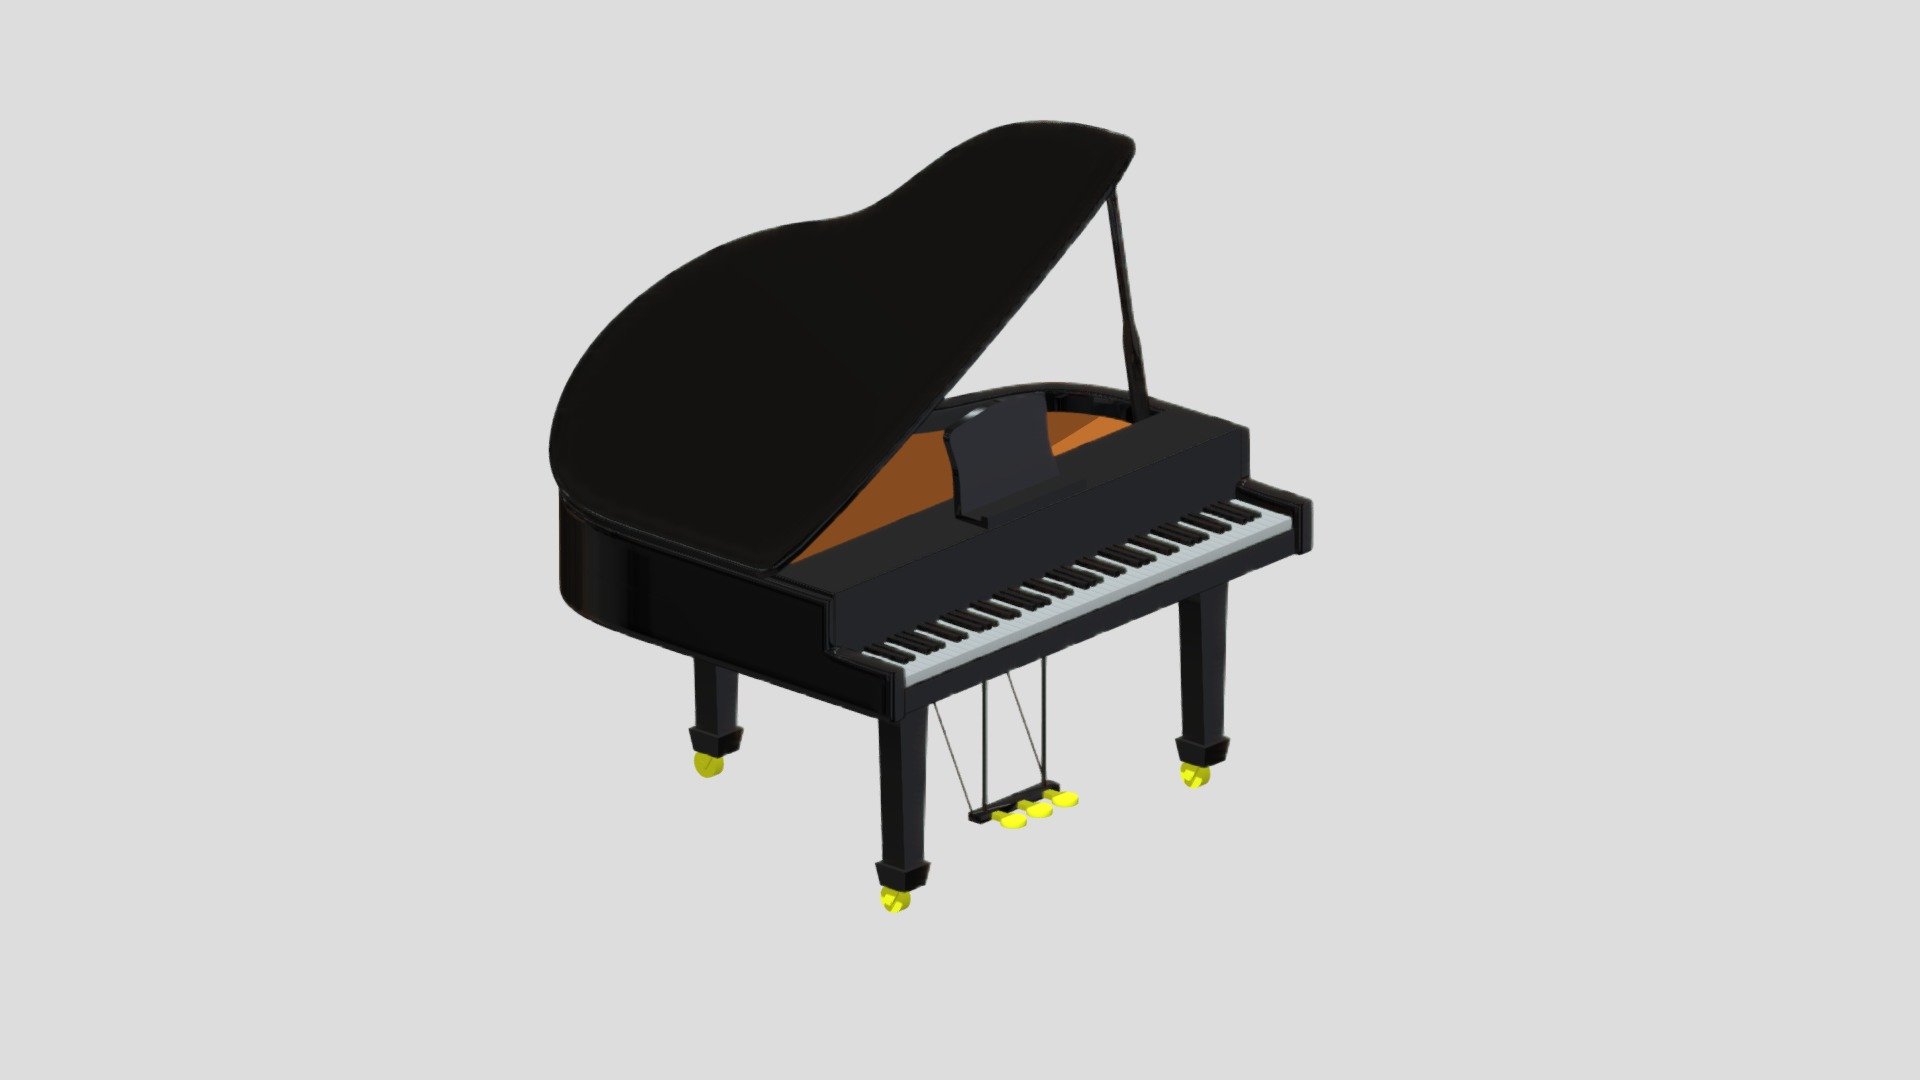 -Cartoon Piano.

-This product contains 96 models.

-Contains 52 white keys.

-Contains 36 black keys.

-This product was created in Blender 2.8.

-Total vertices: 23,670. Total polygons: 23,287;

-Formats: . blend . fbx . obj, c4d,dae,fbx,unity.

-We hope you enjoy this model.

-Thank you 3d model